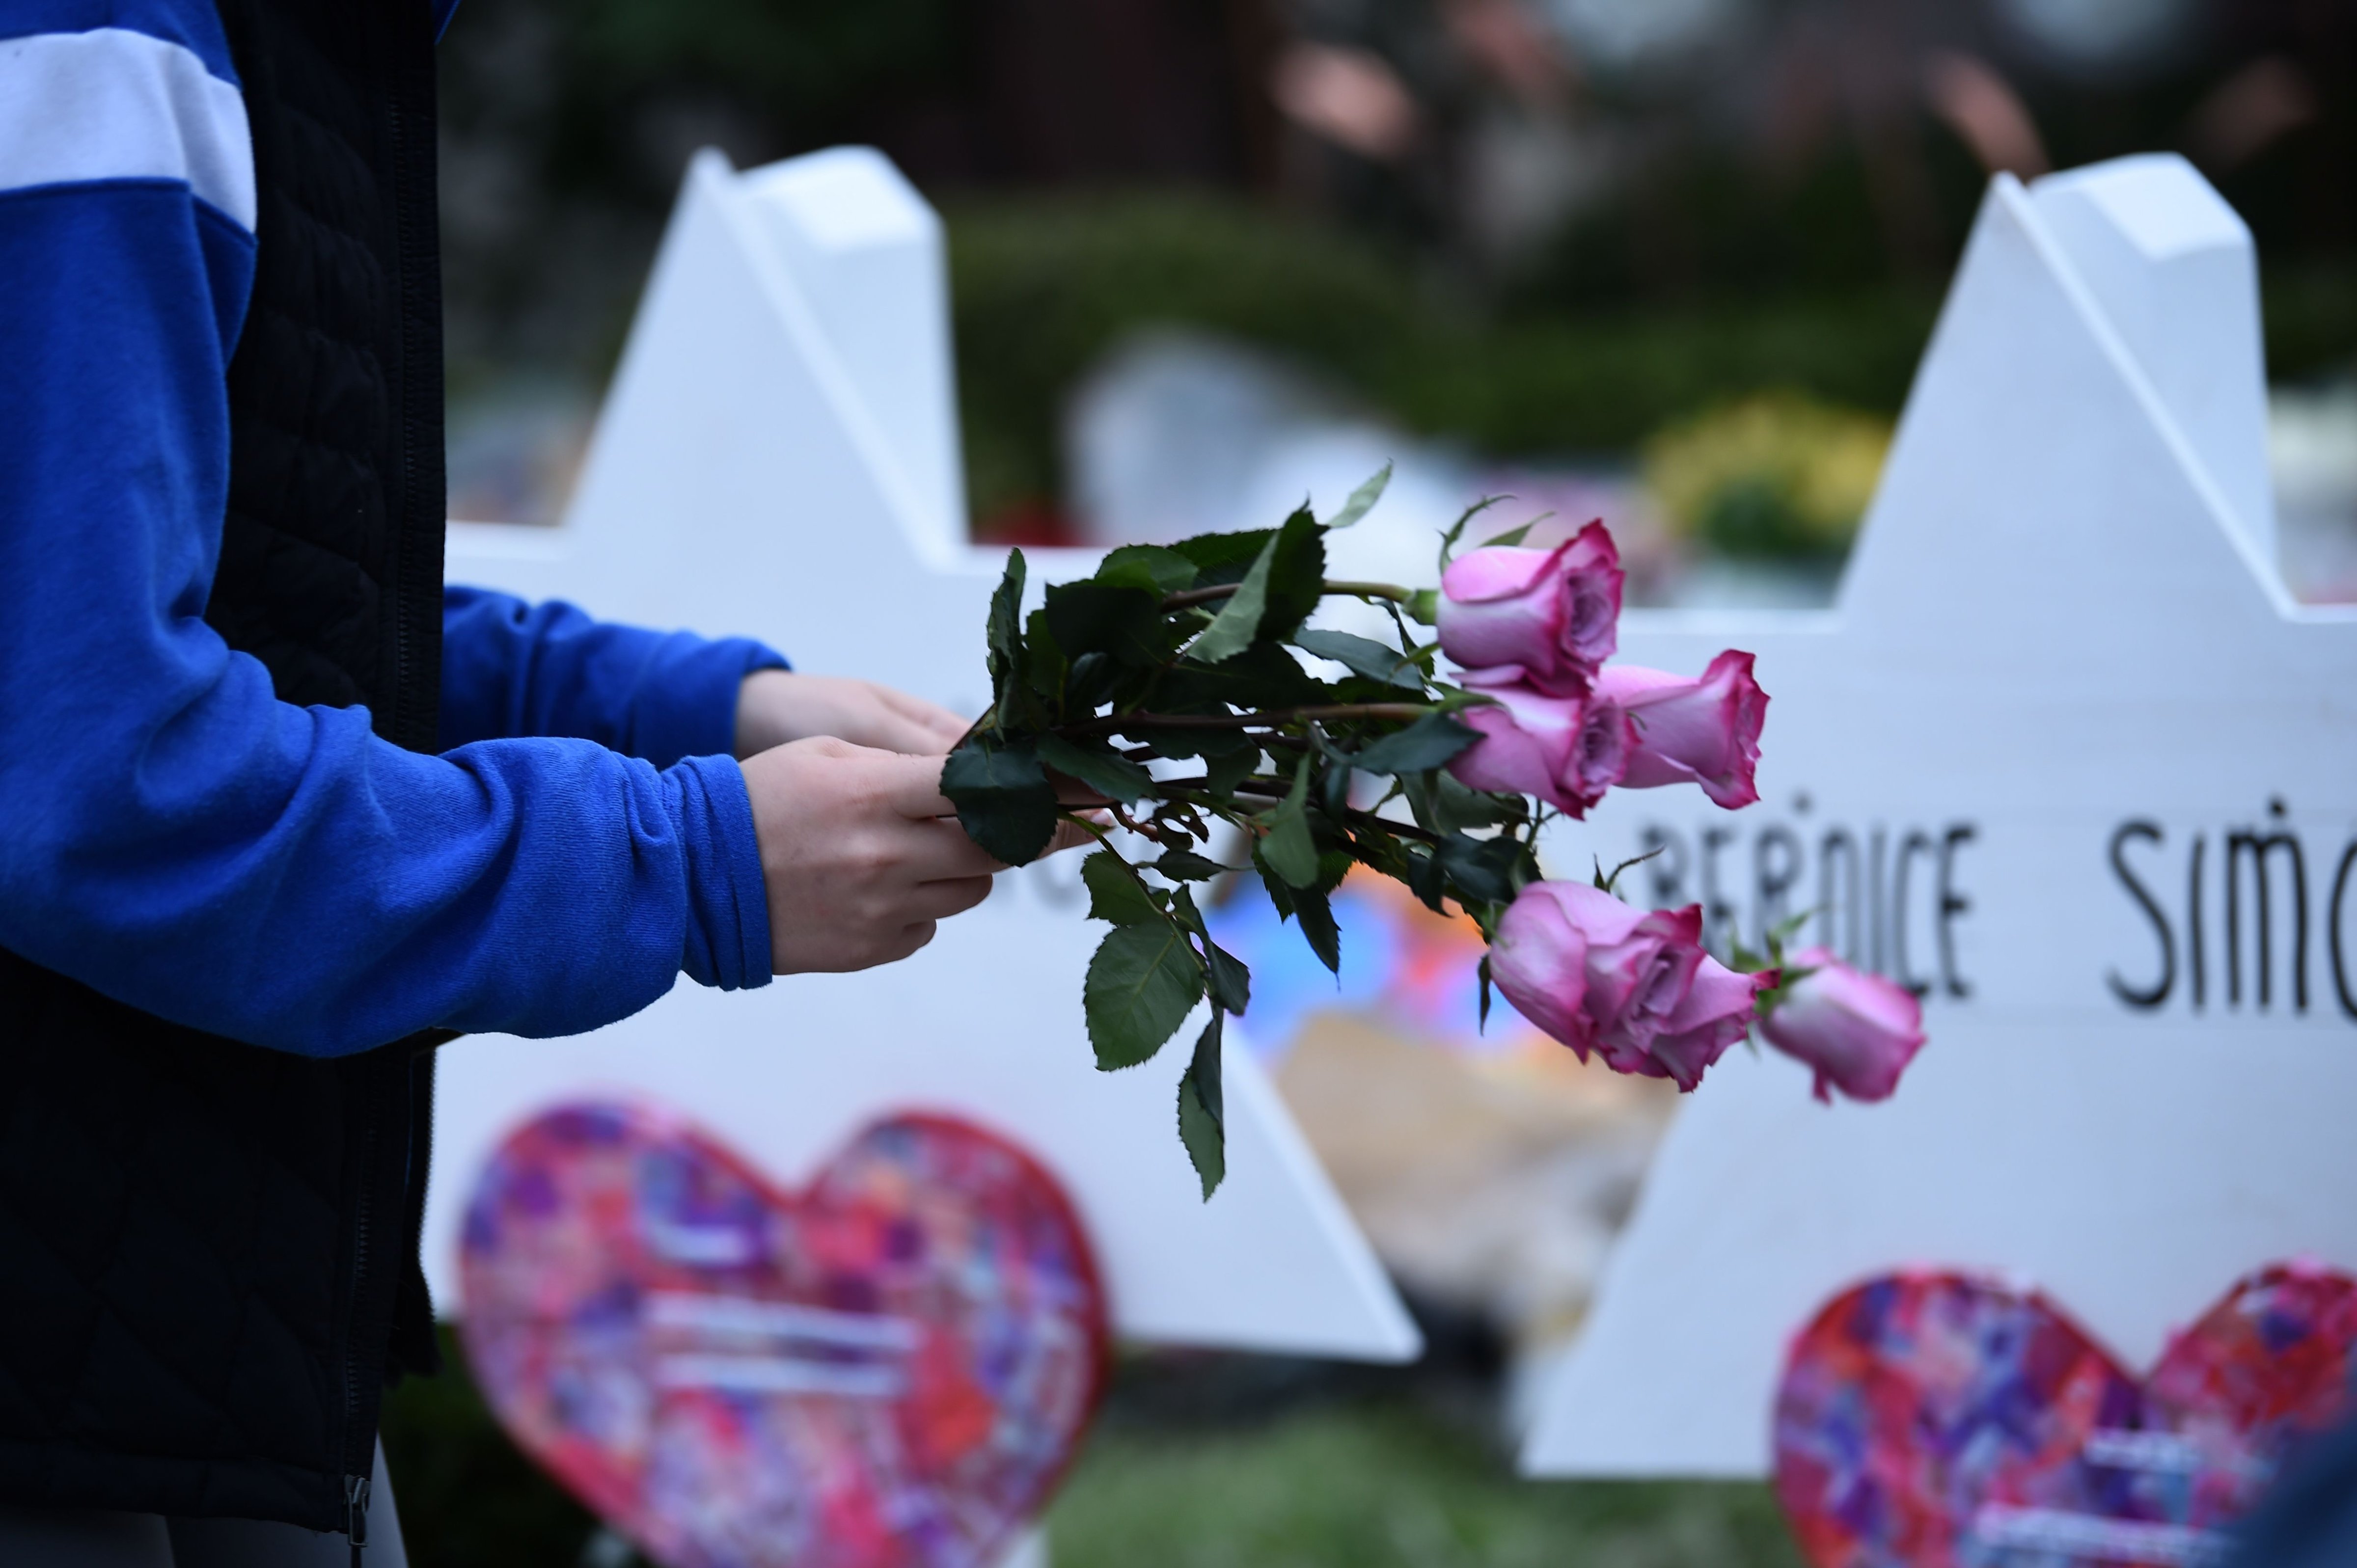 People pay their respects at a memorial outside the Tree of Life synagogue after a shooting there left 11 people dead in the Squirrel Hill neighborhood of Pittsburgh, Pennsylvania on October 29, 2018. Bernice and Sylvan Simon, married 62 years, were laid to rest Thursday. (BRENDAN SMIALOWSKI&mdash;AFP/Getty Images)